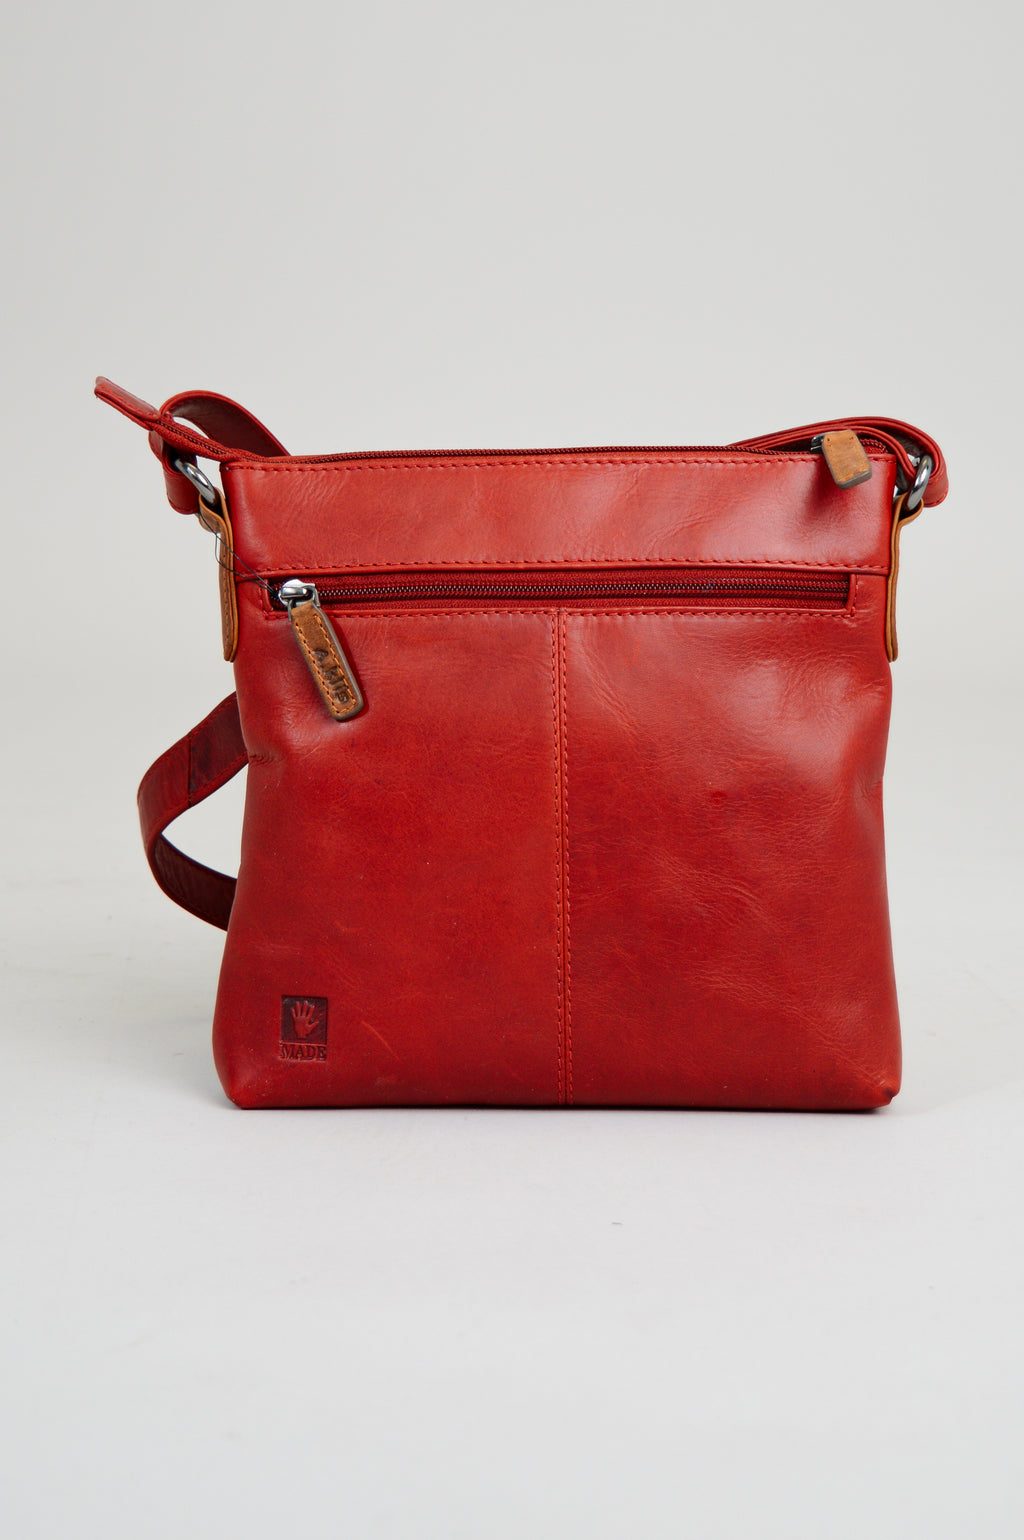 Padfield Burgundy Leather Zip Purse Made in England UK